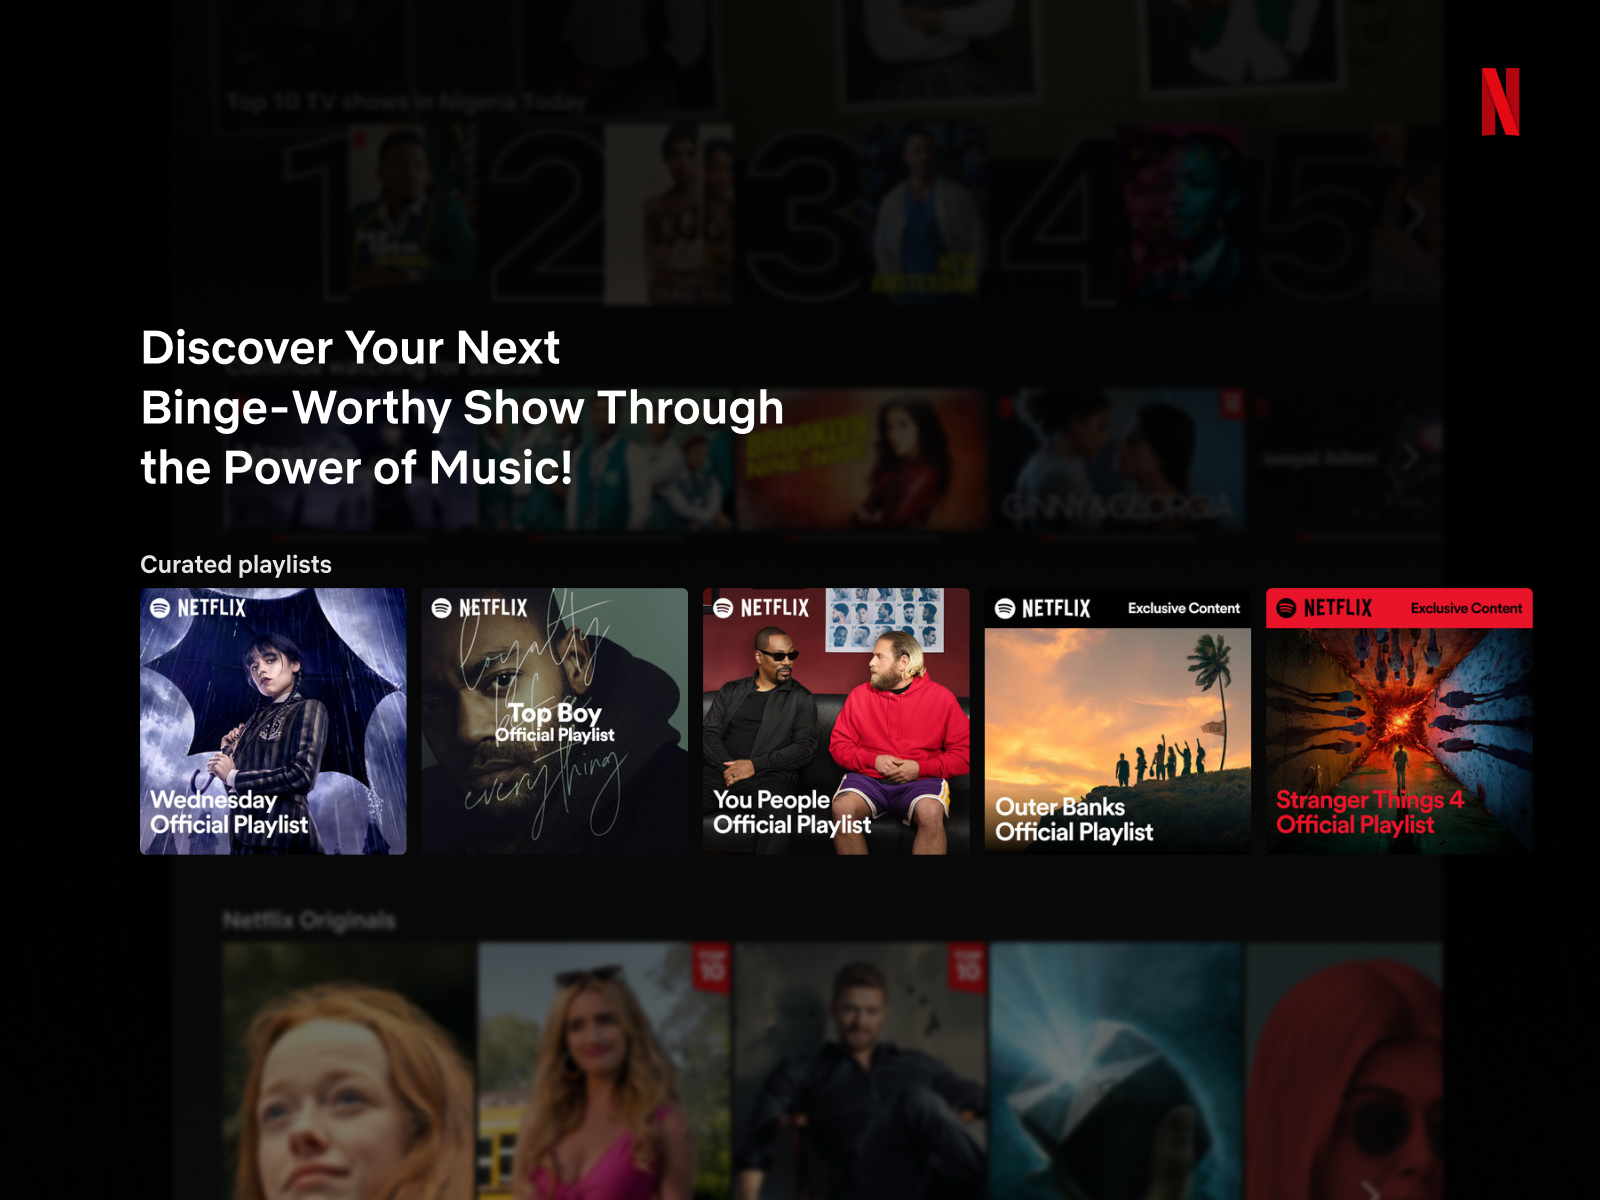 Netflix - Discover shows through music idea by Samad Agbaje on Dribbble